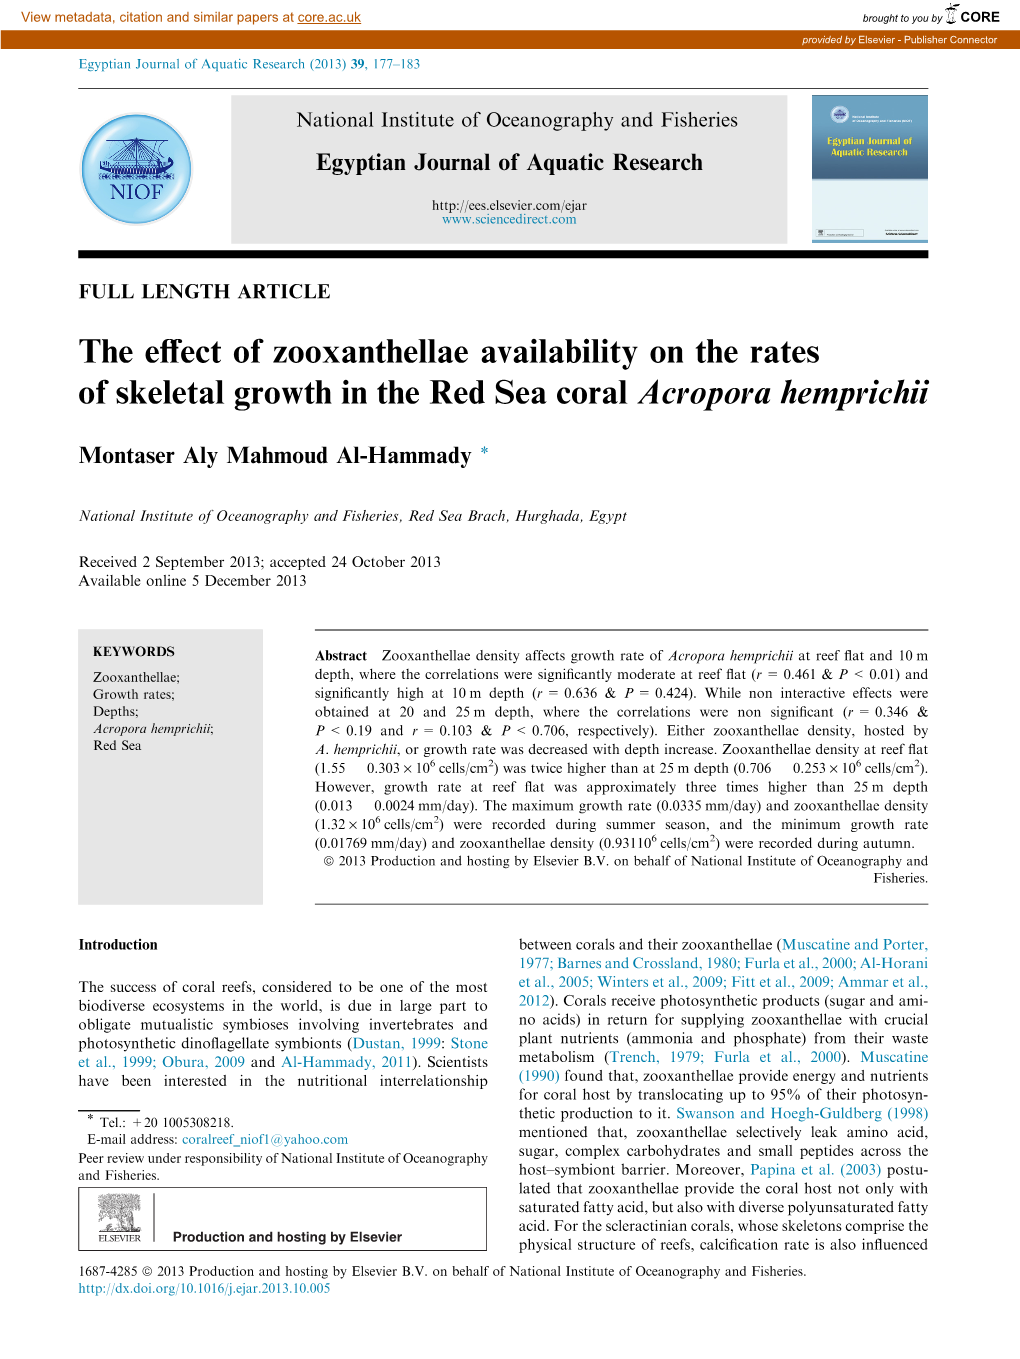 The Effect of Zooxanthellae Availability on the Rates of Skeletal Growth in the Red Sea Coral Acropora Hemprichii 179